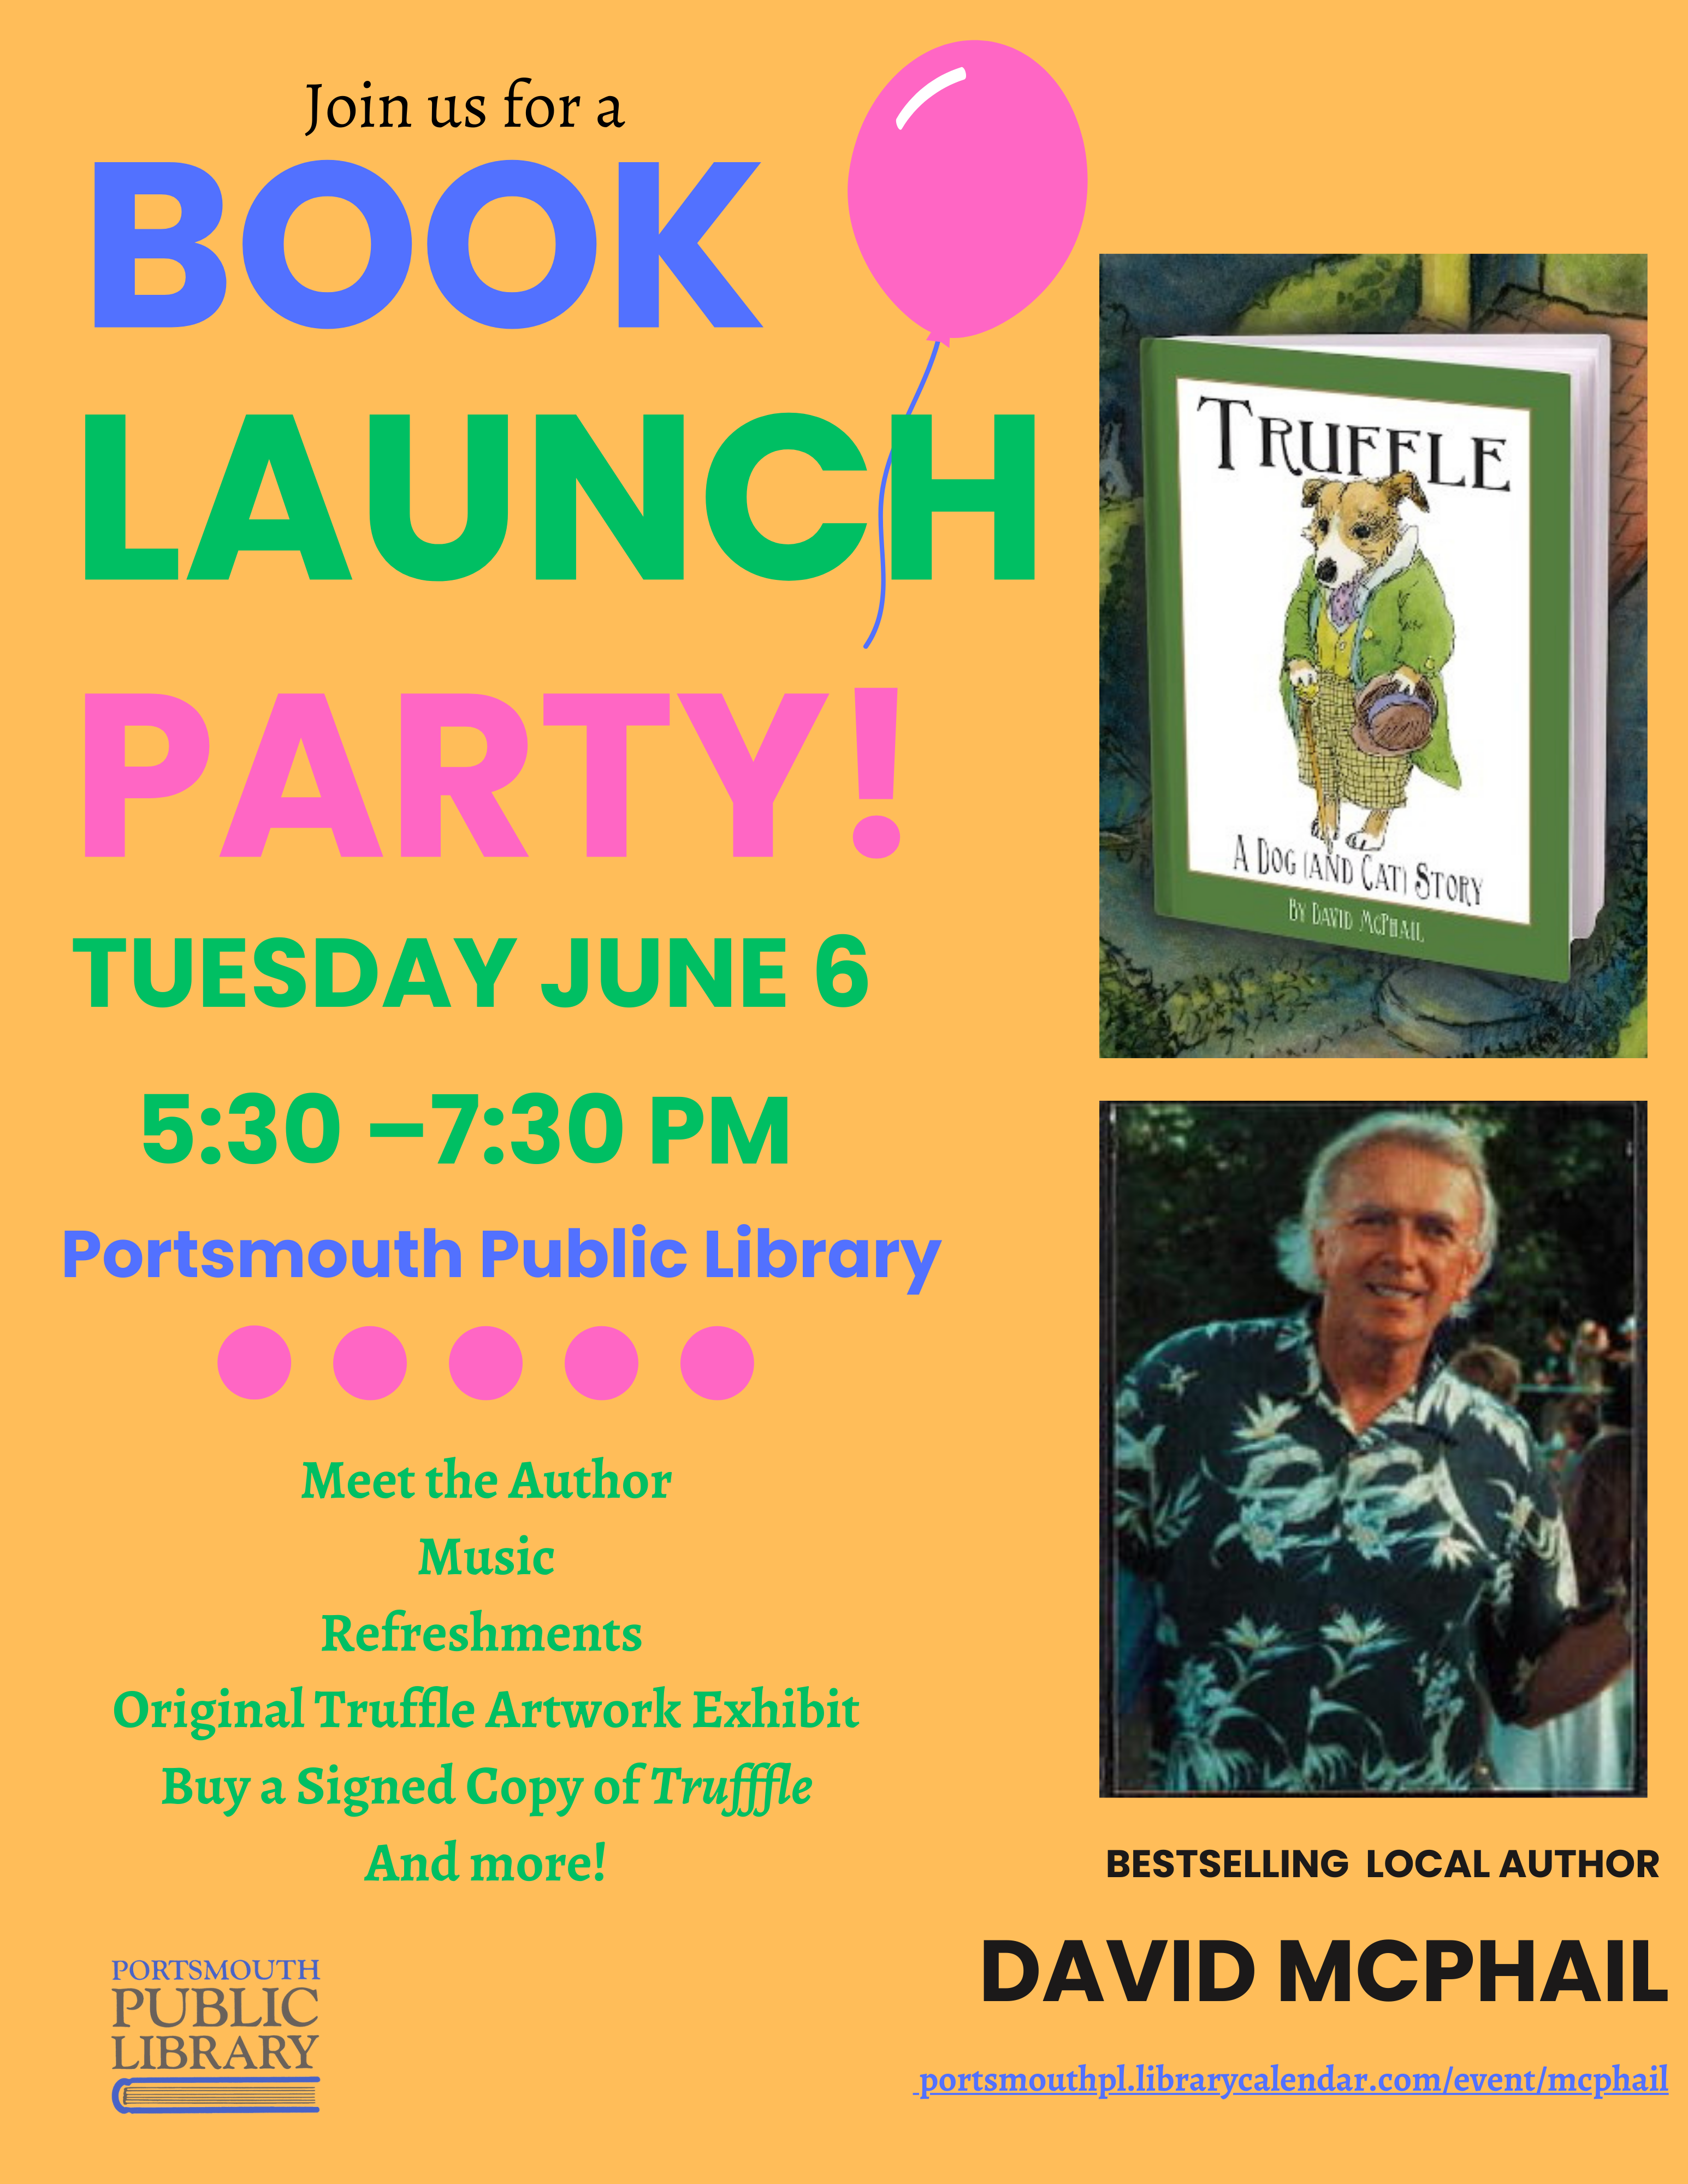 Join us for a Book Launch Party! Tuesday June 6 5:30 to 7:30 PM Portsmouth Public Library Meet the Author Music Refreshments Original Truffle Artwork Exhibit Buy a signed copy of Truffle and more! Bestselling Local Author David McPhail Truffle a Dog and Cat Story portmouthpl.librarycalendar.com/event/mcphail